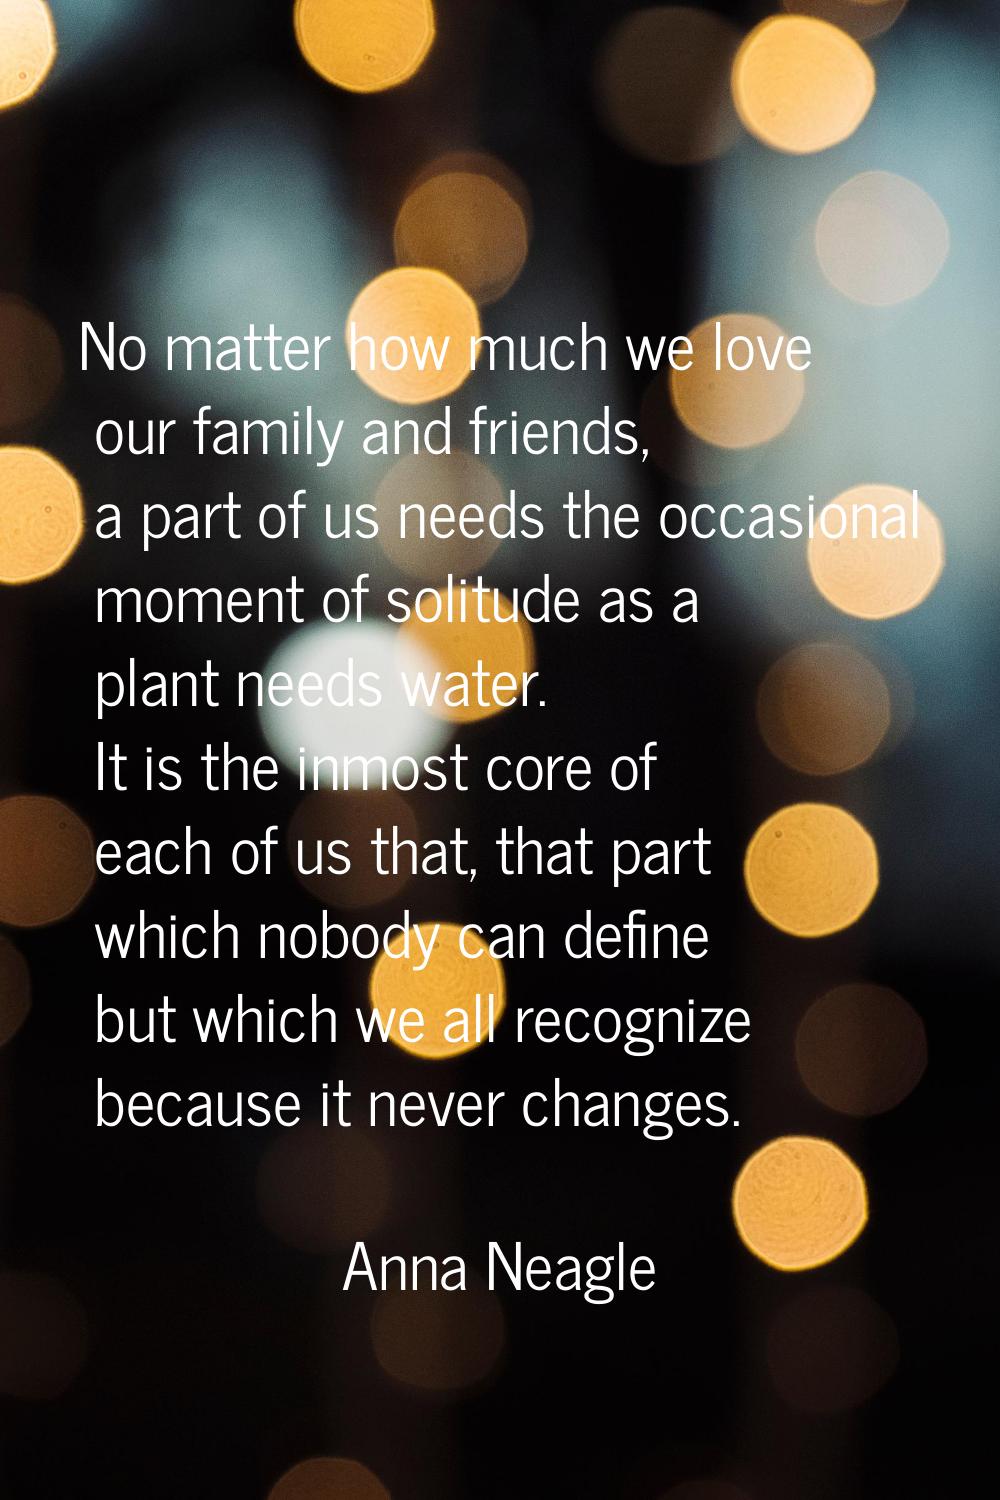 No matter how much we love our family and friends, a part of us needs the occasional moment of soli